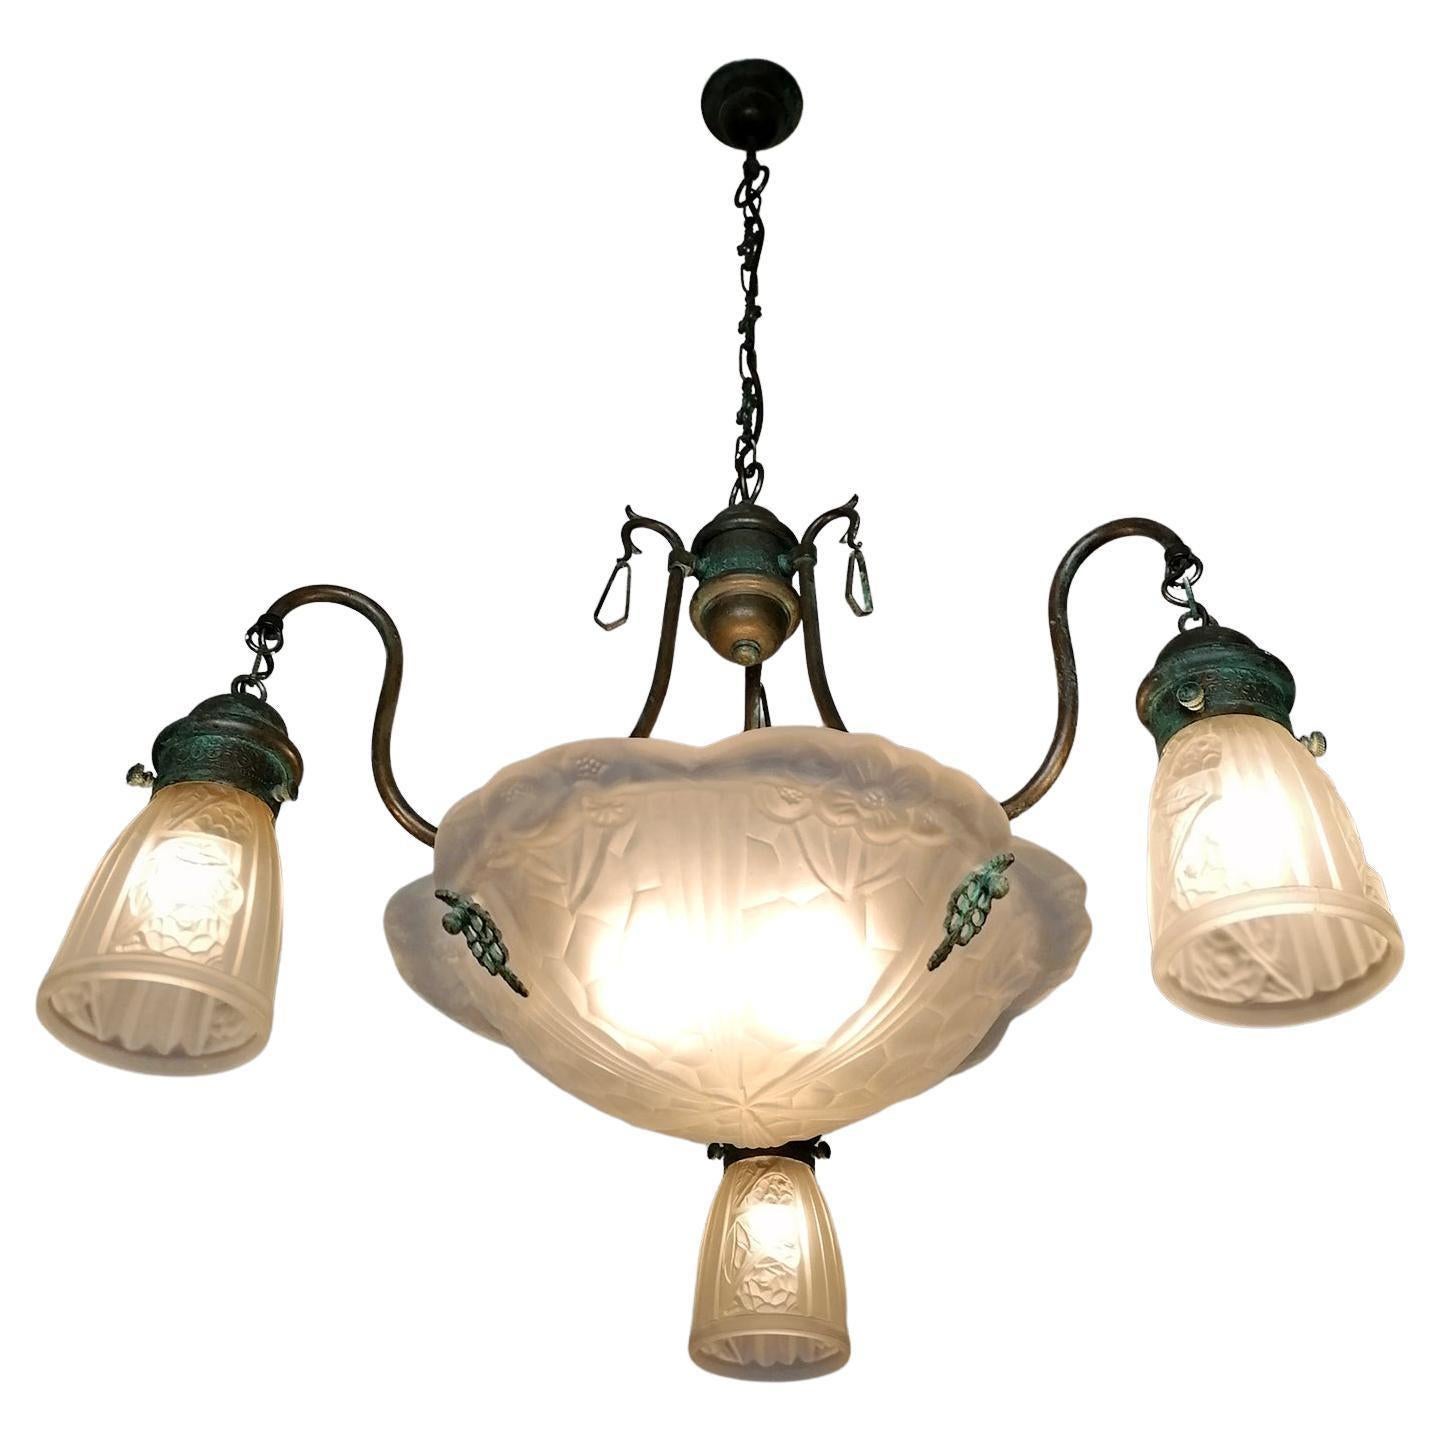 French Art Deco Art Nouveau Frosted Glass and Brass Chandelier For Sale 3